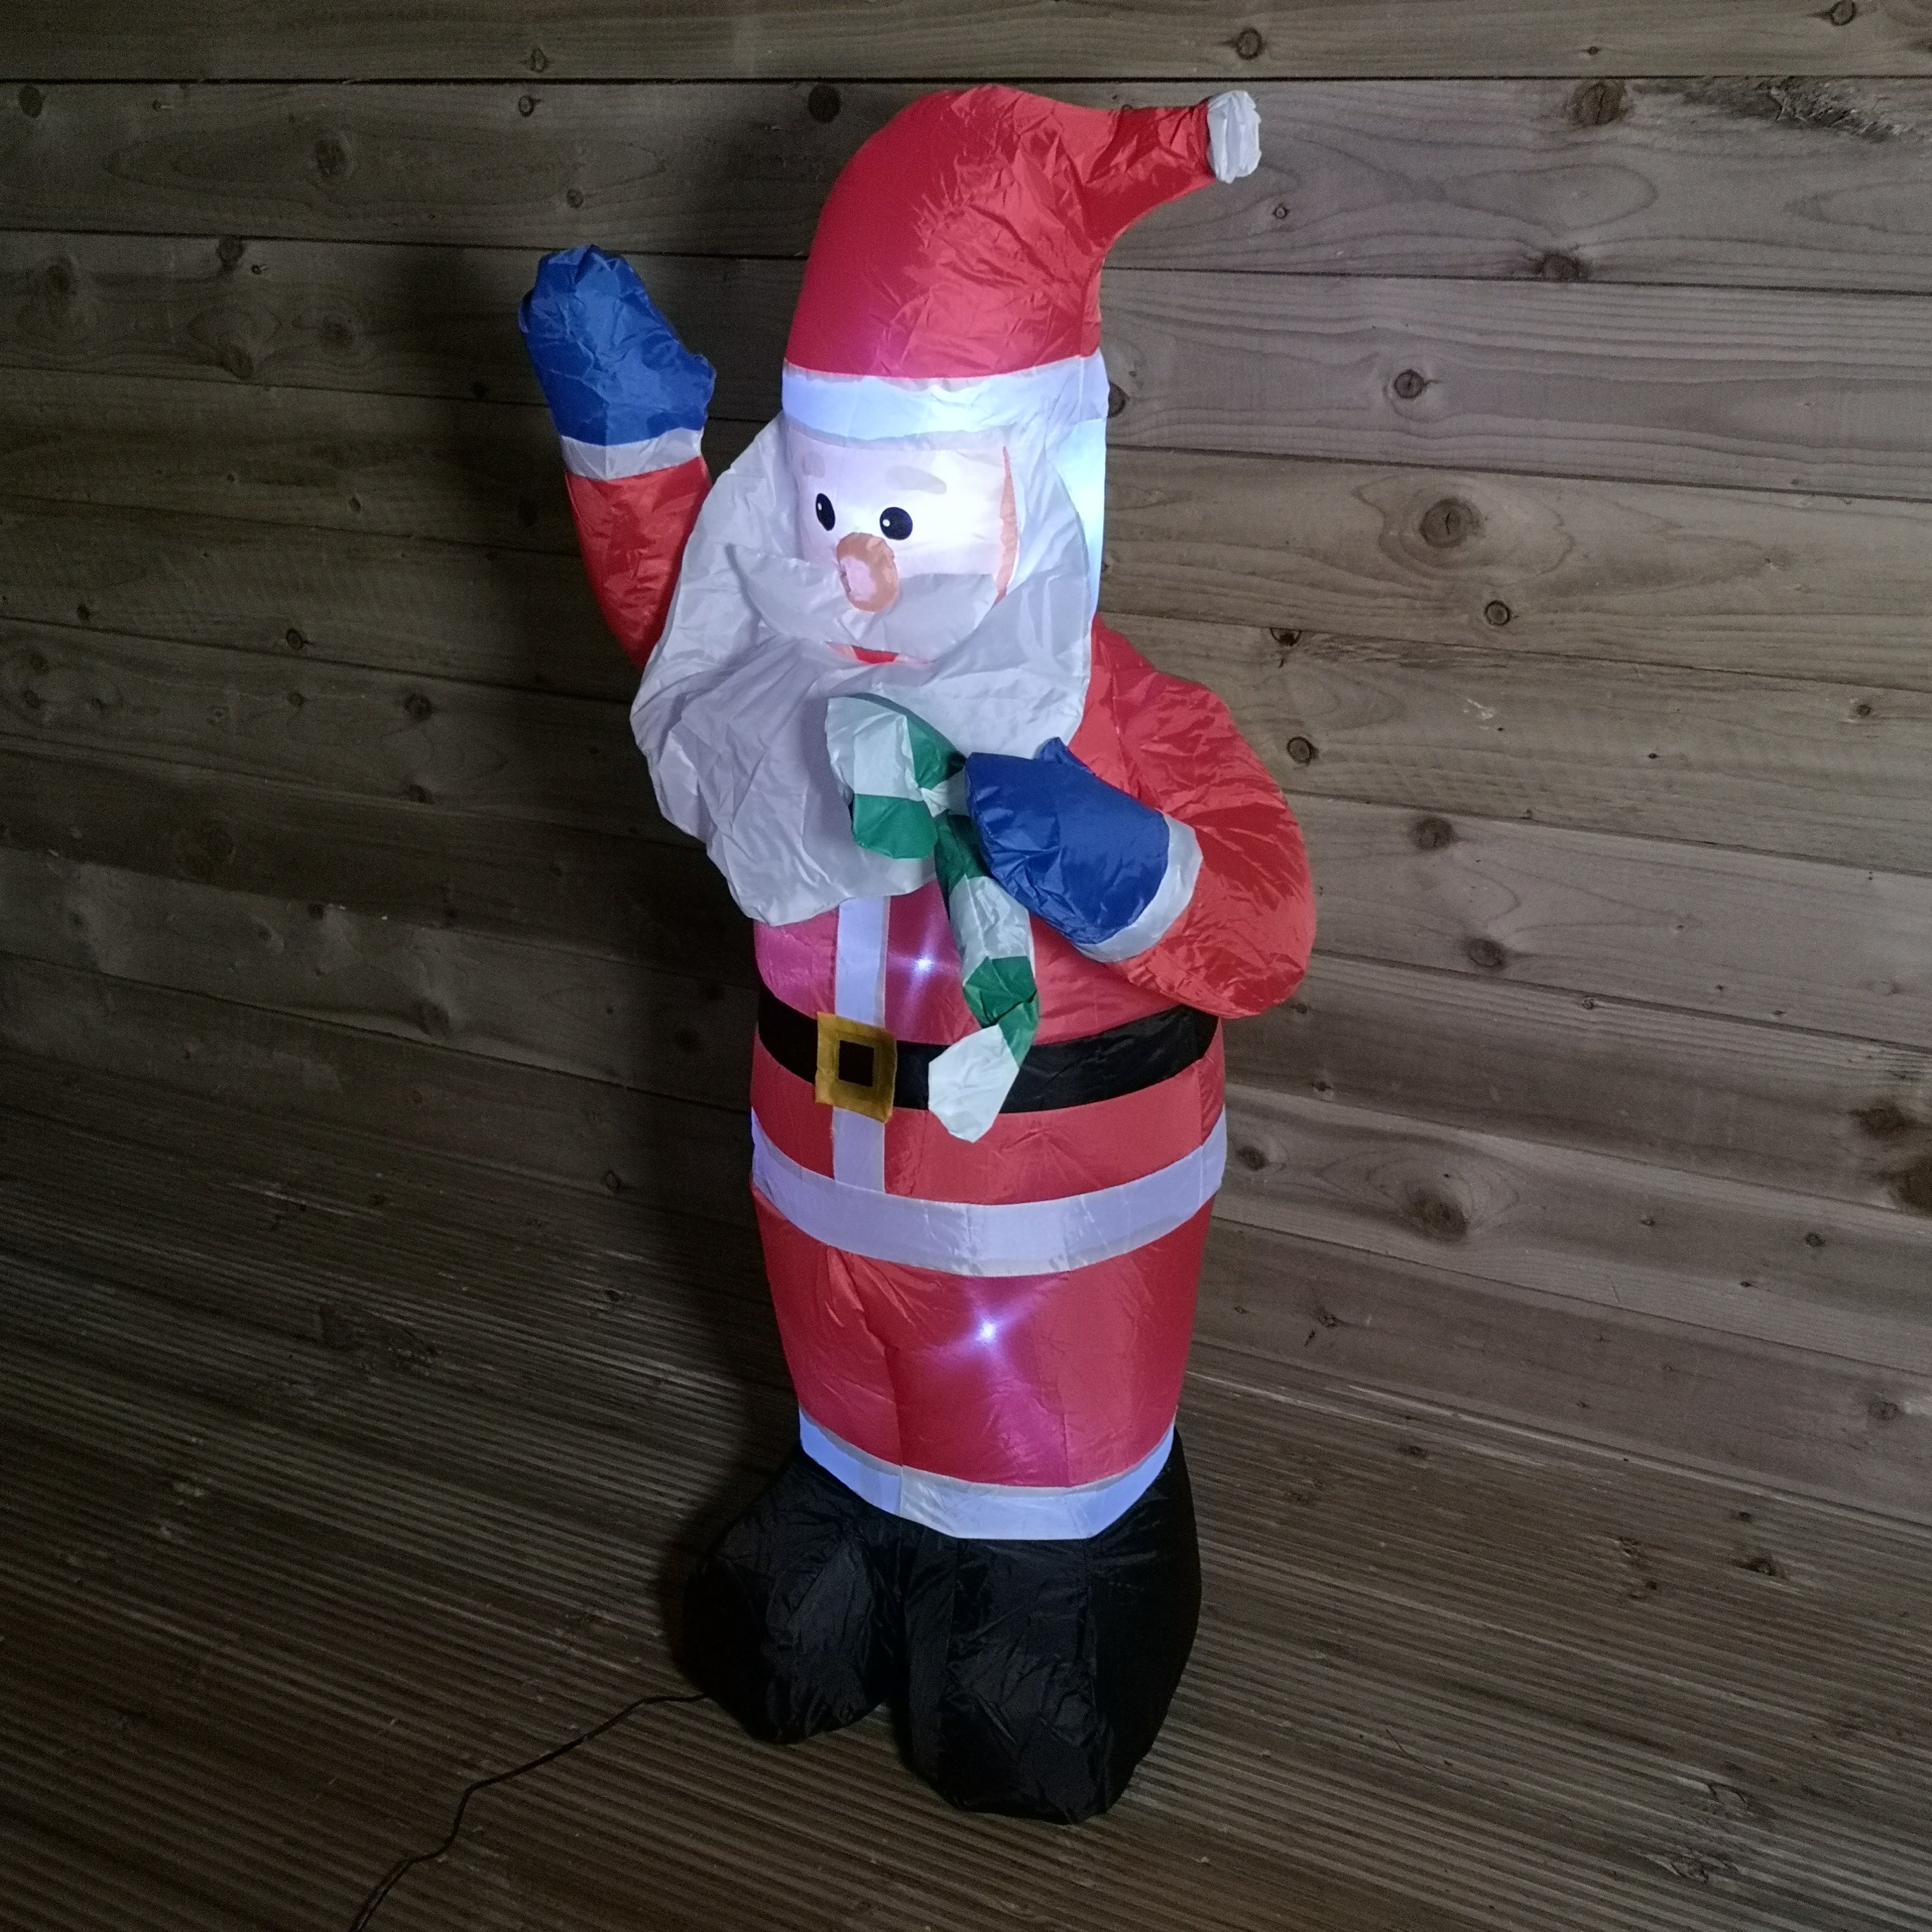 120cm (4ft) Tall Inflatable Indoor / Outdoor Christmas Santa & Candy Cane